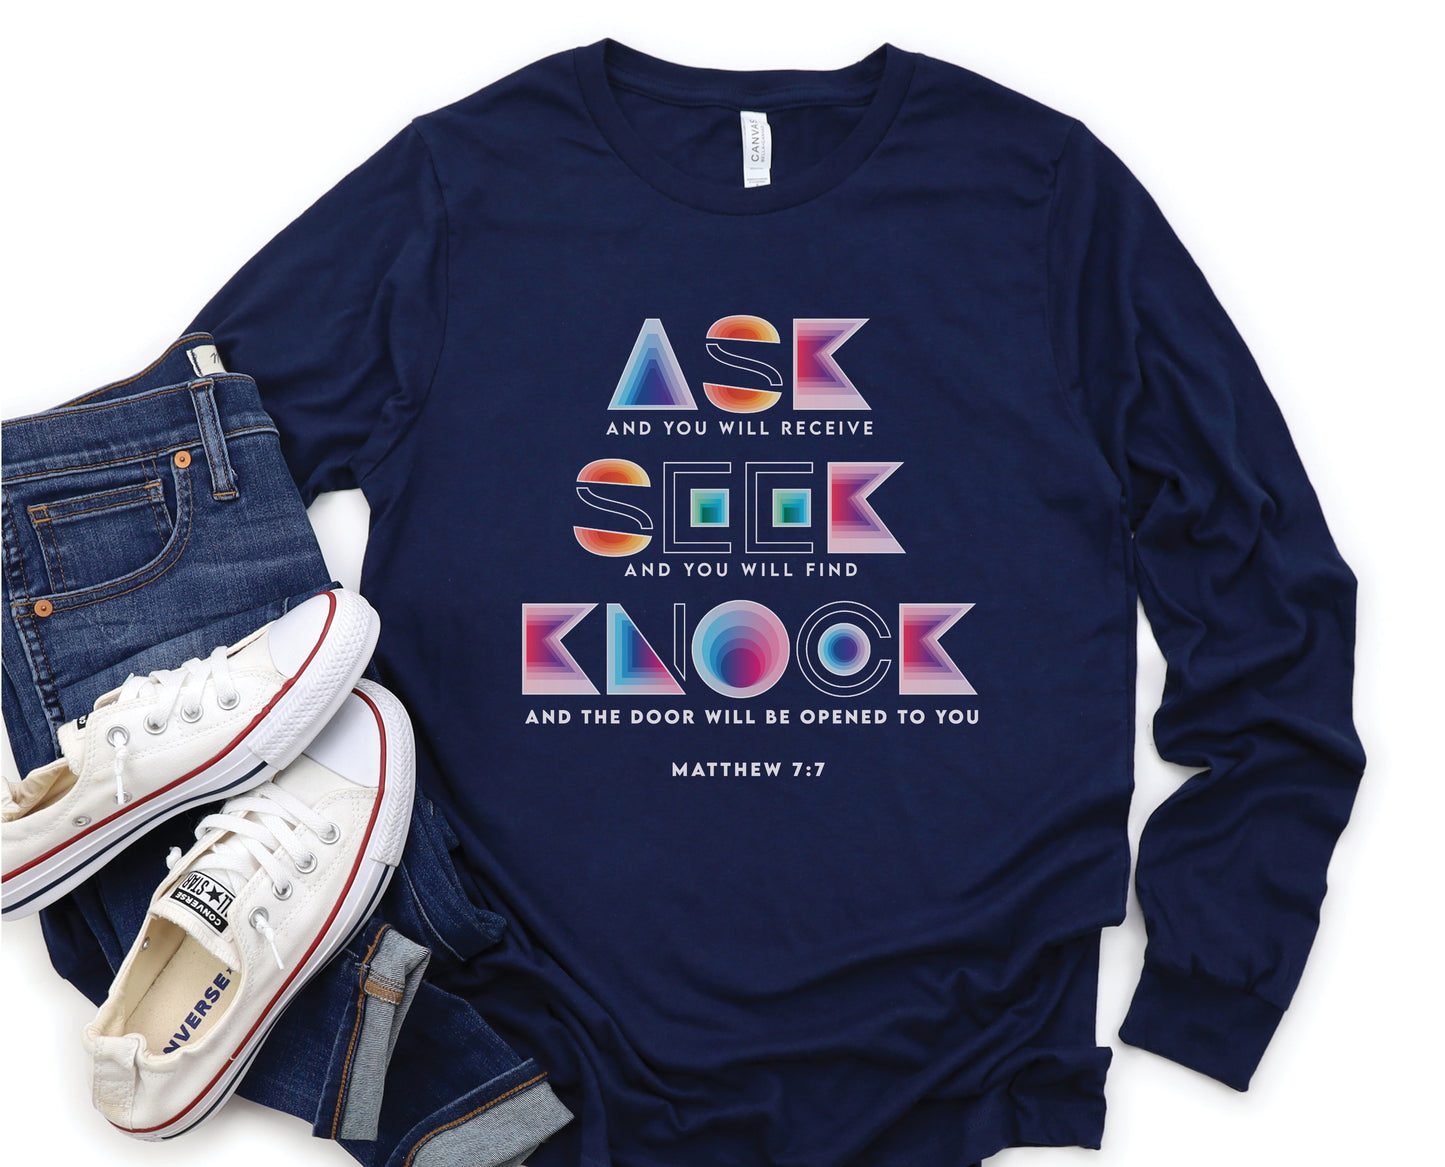 Ask Seek Knock Matthew 7:7 Christian aesthetic design printed in holographic colors on navy blue soft long sleeve tee for men & women